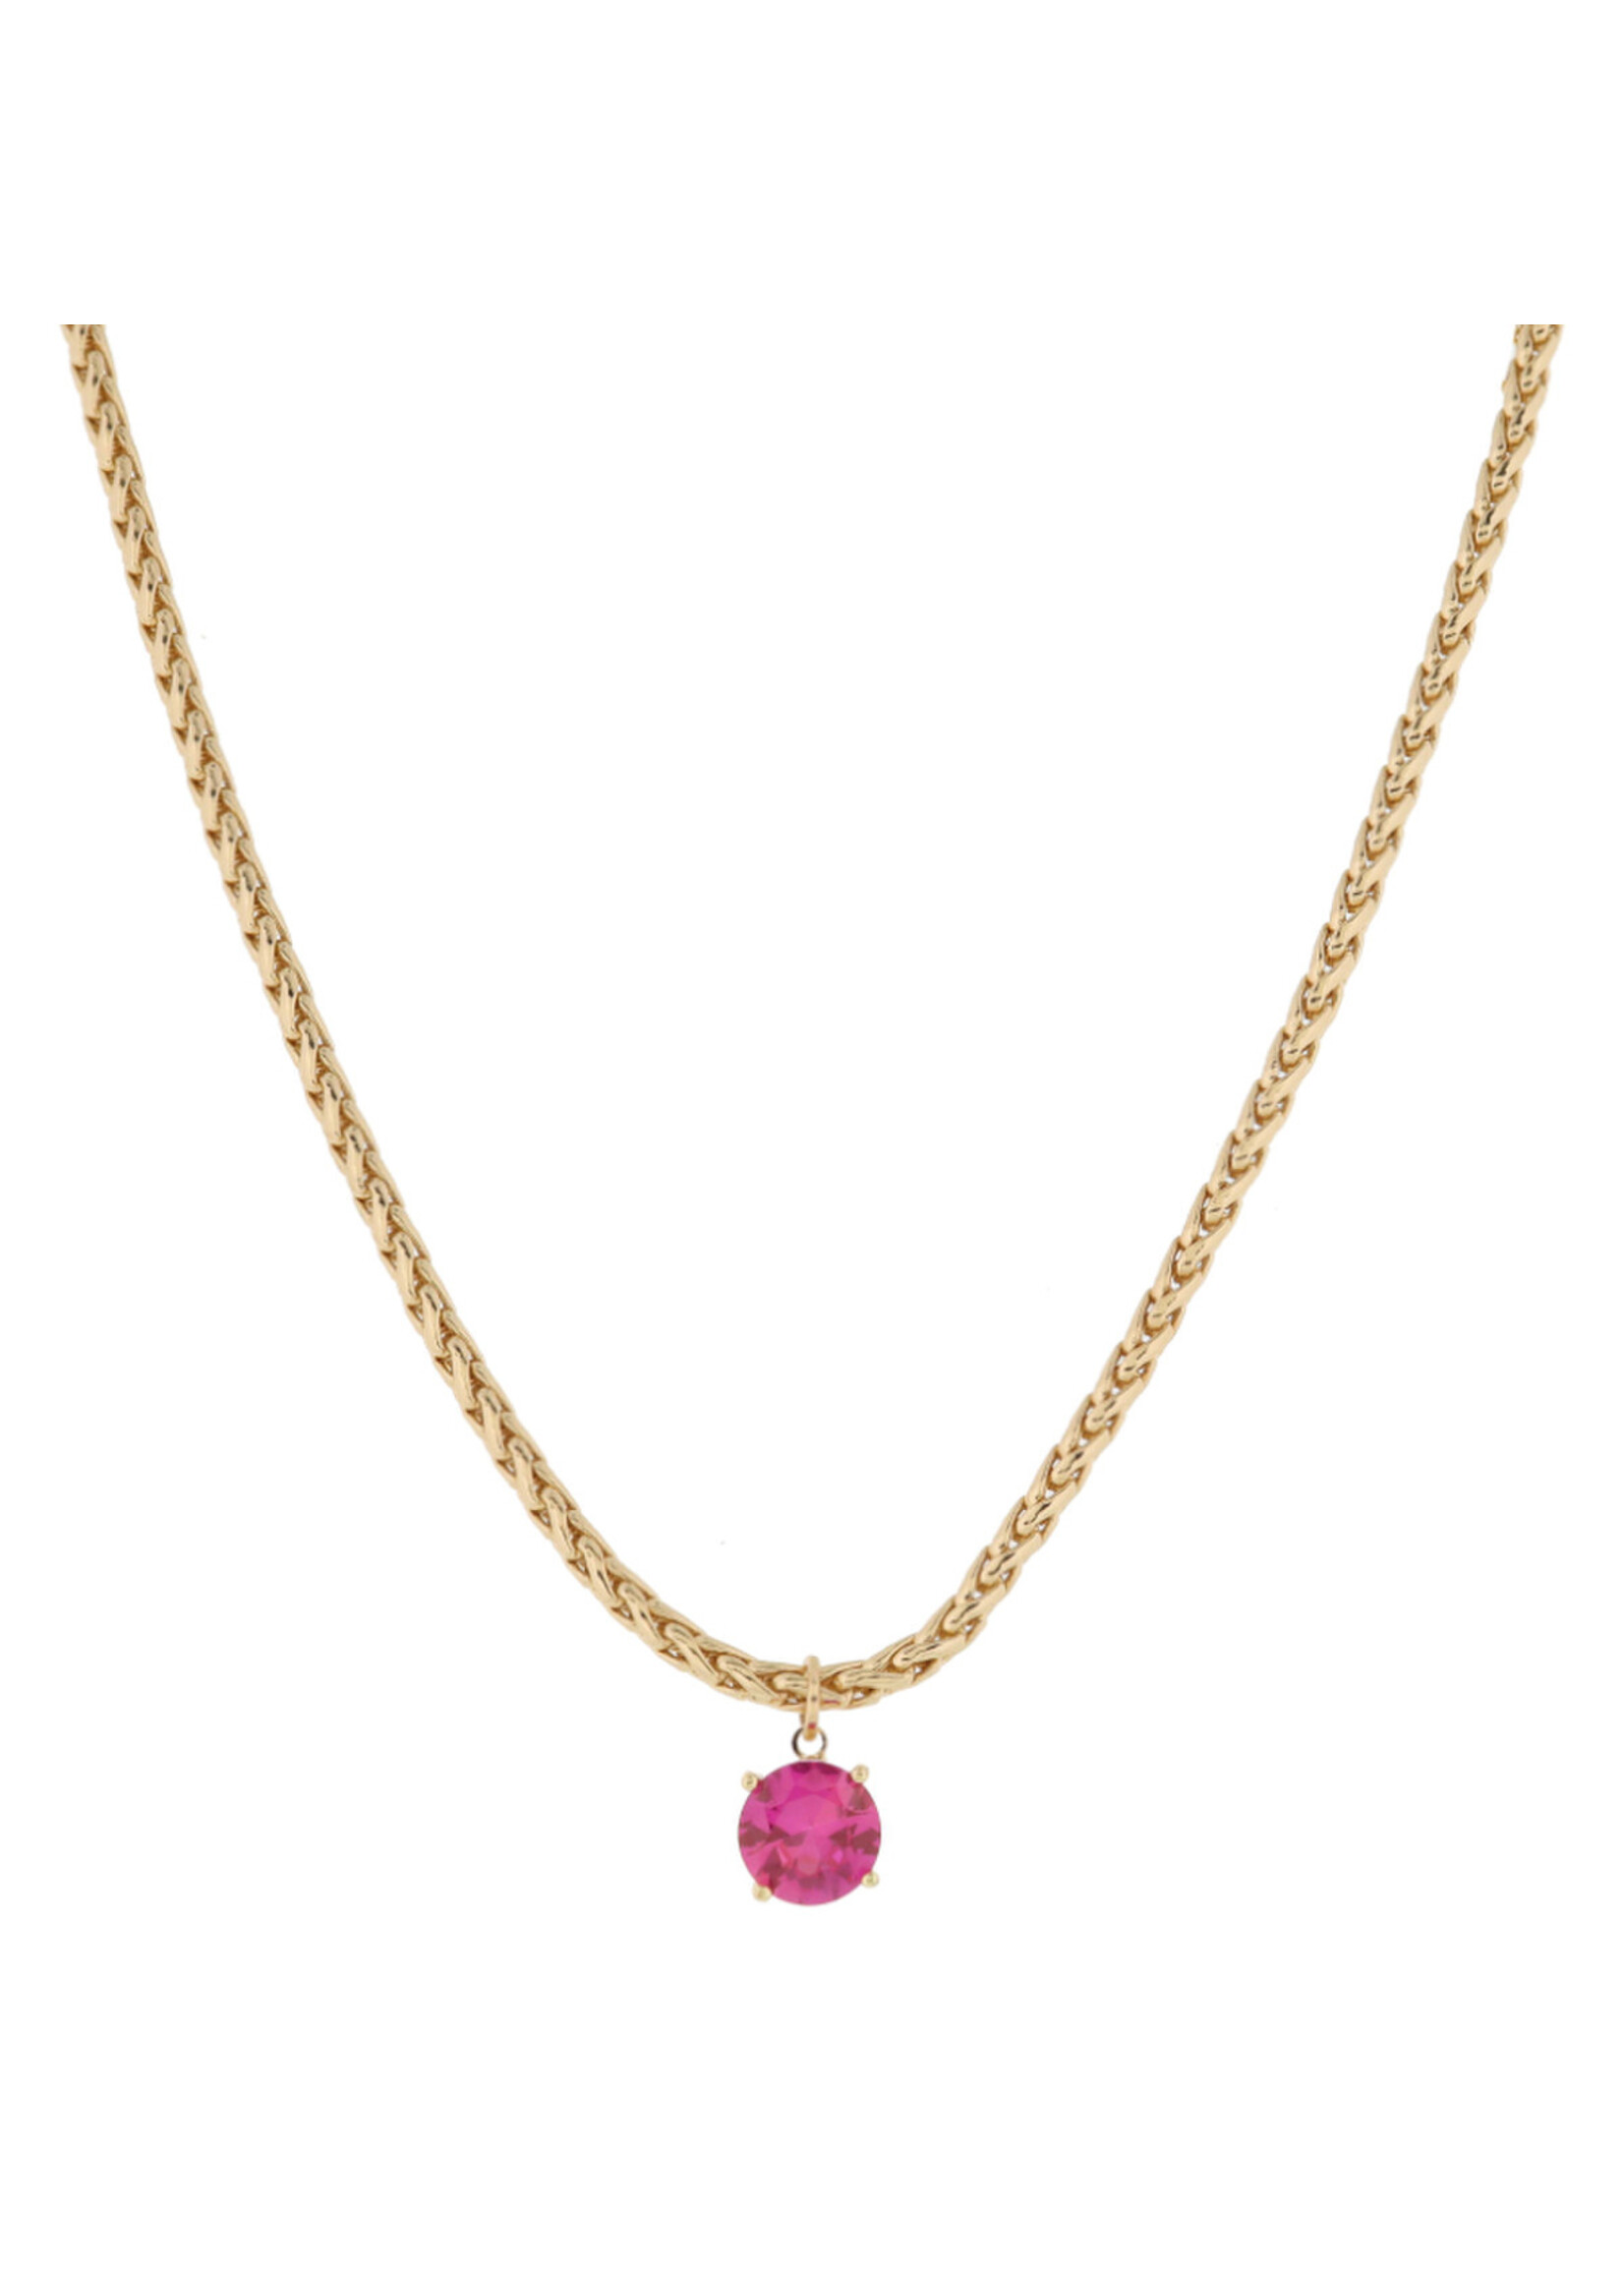 Jane Marie Shiny Gold Wheat Chain with Crystal Drop Necklace, .35" Pendant